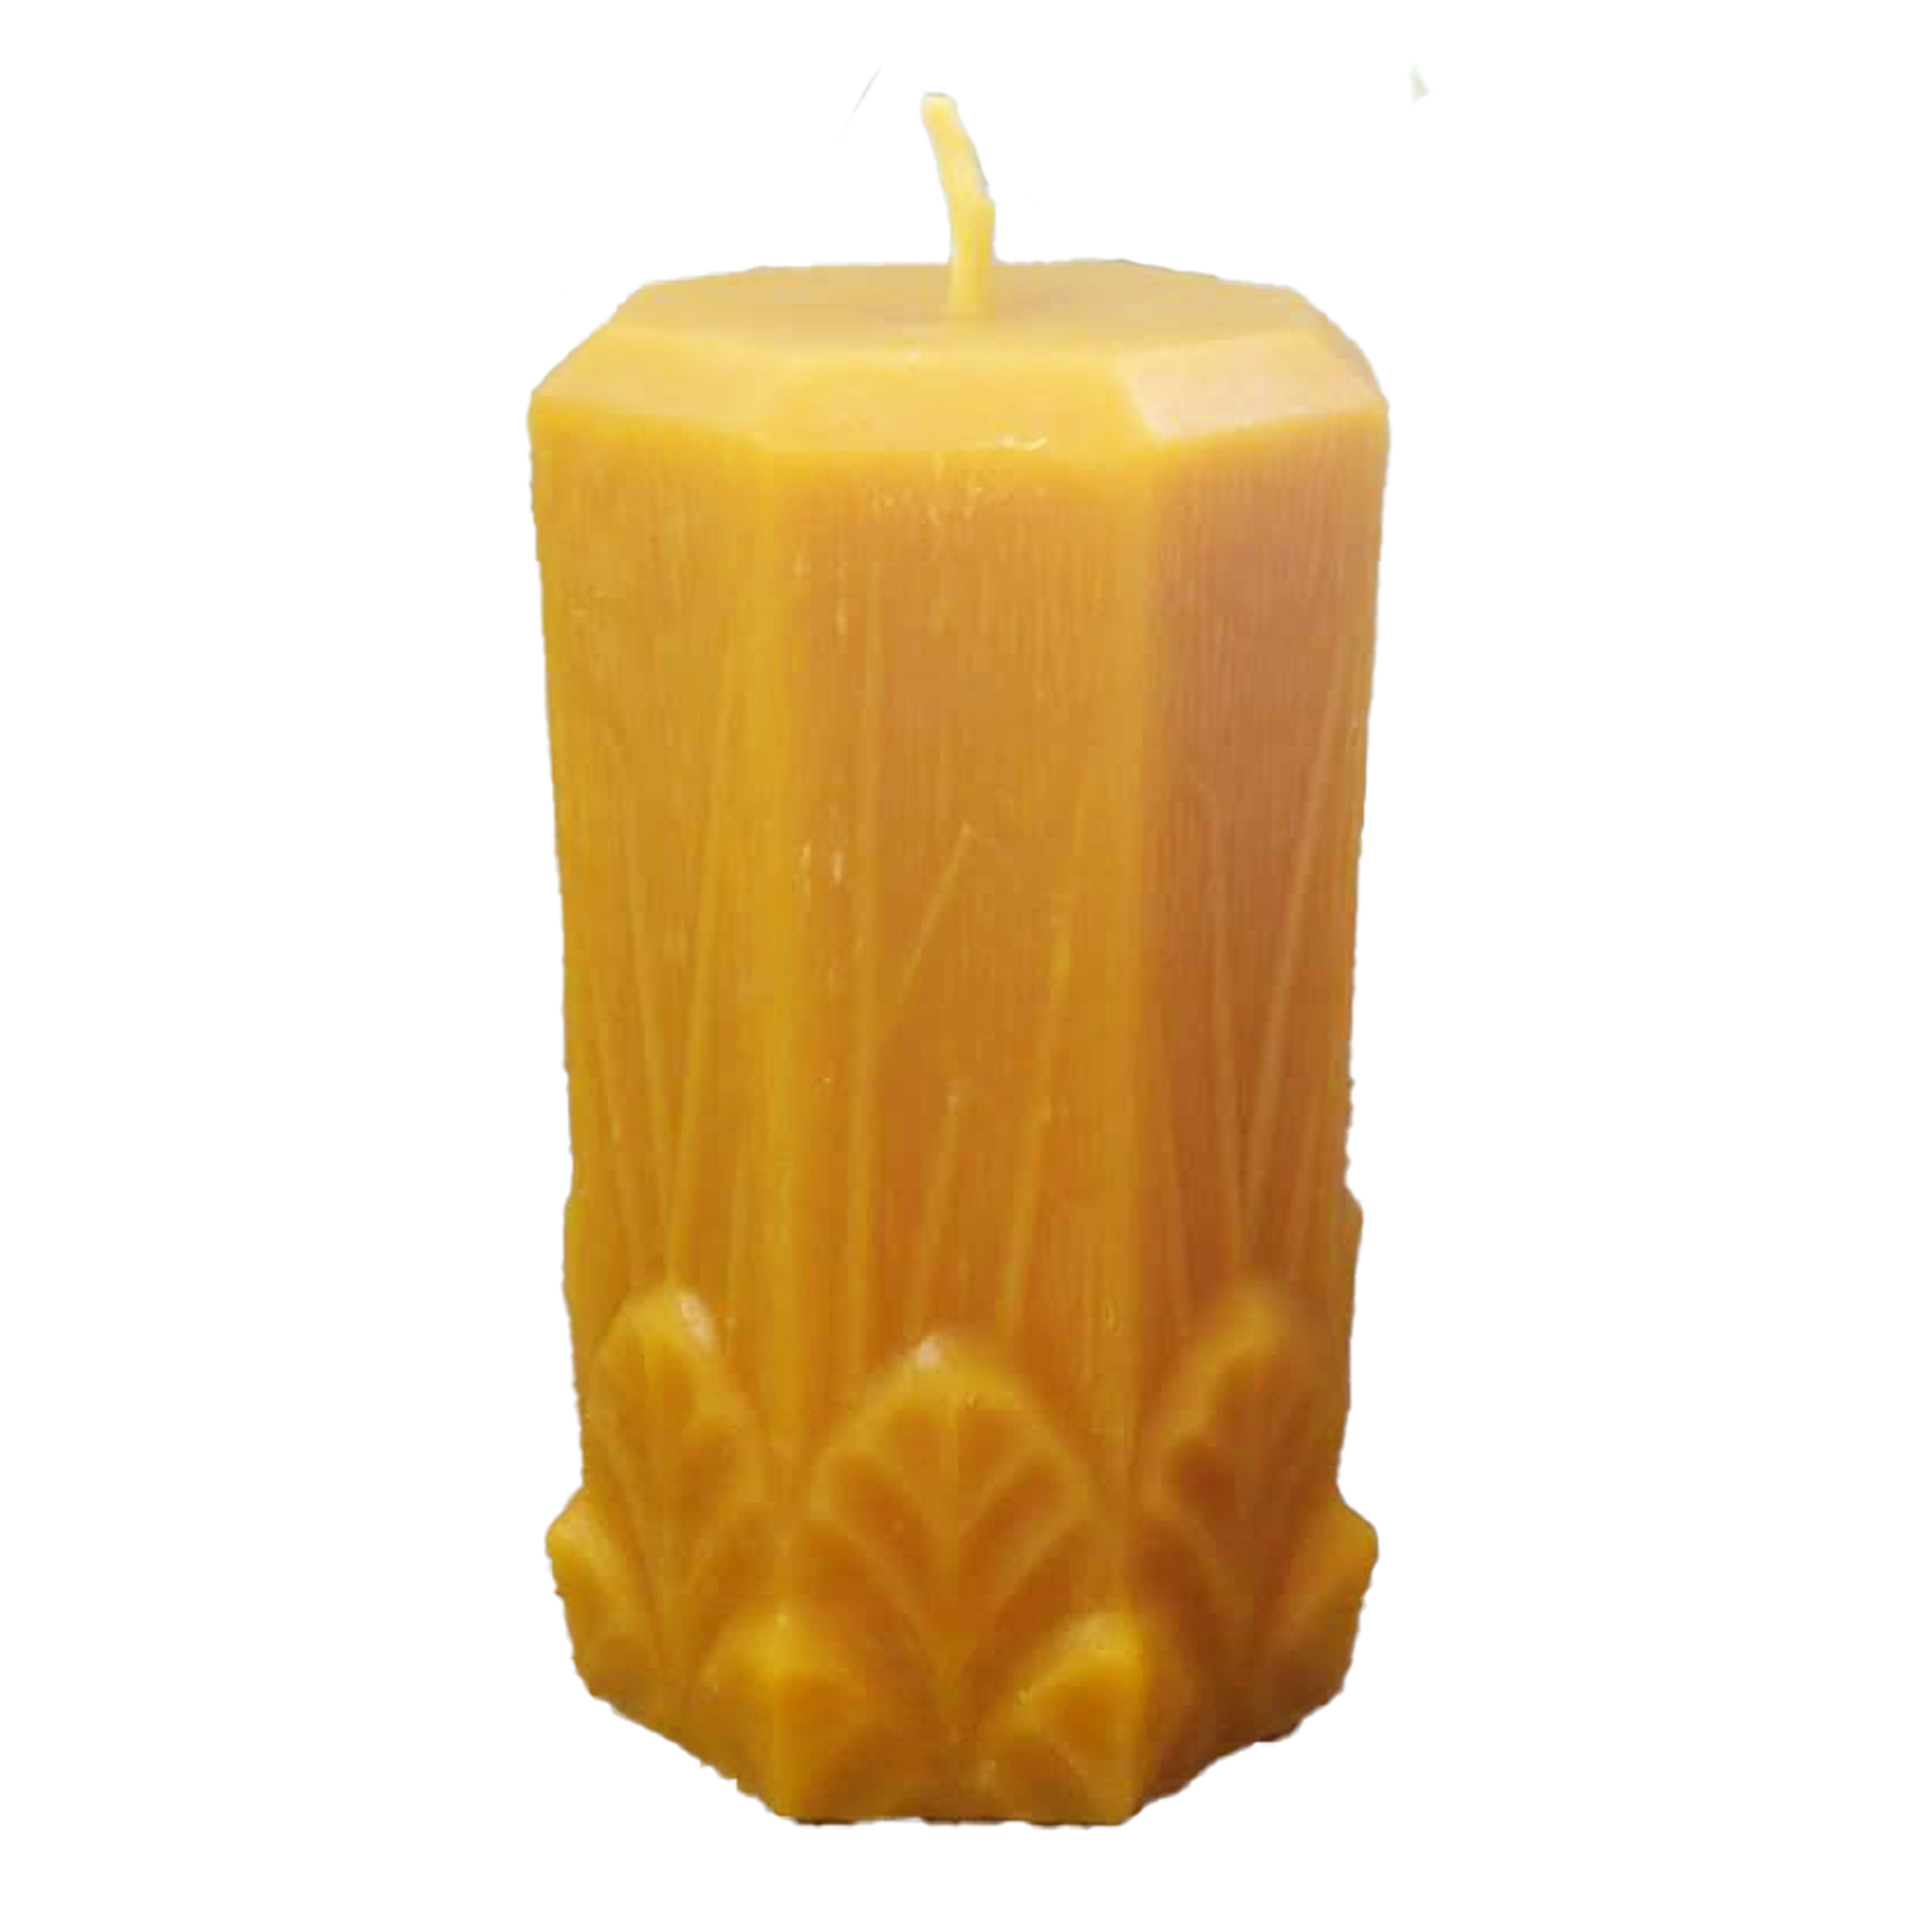 Octagonal pure beeswax candle with garden leaves and grasses at the bottom